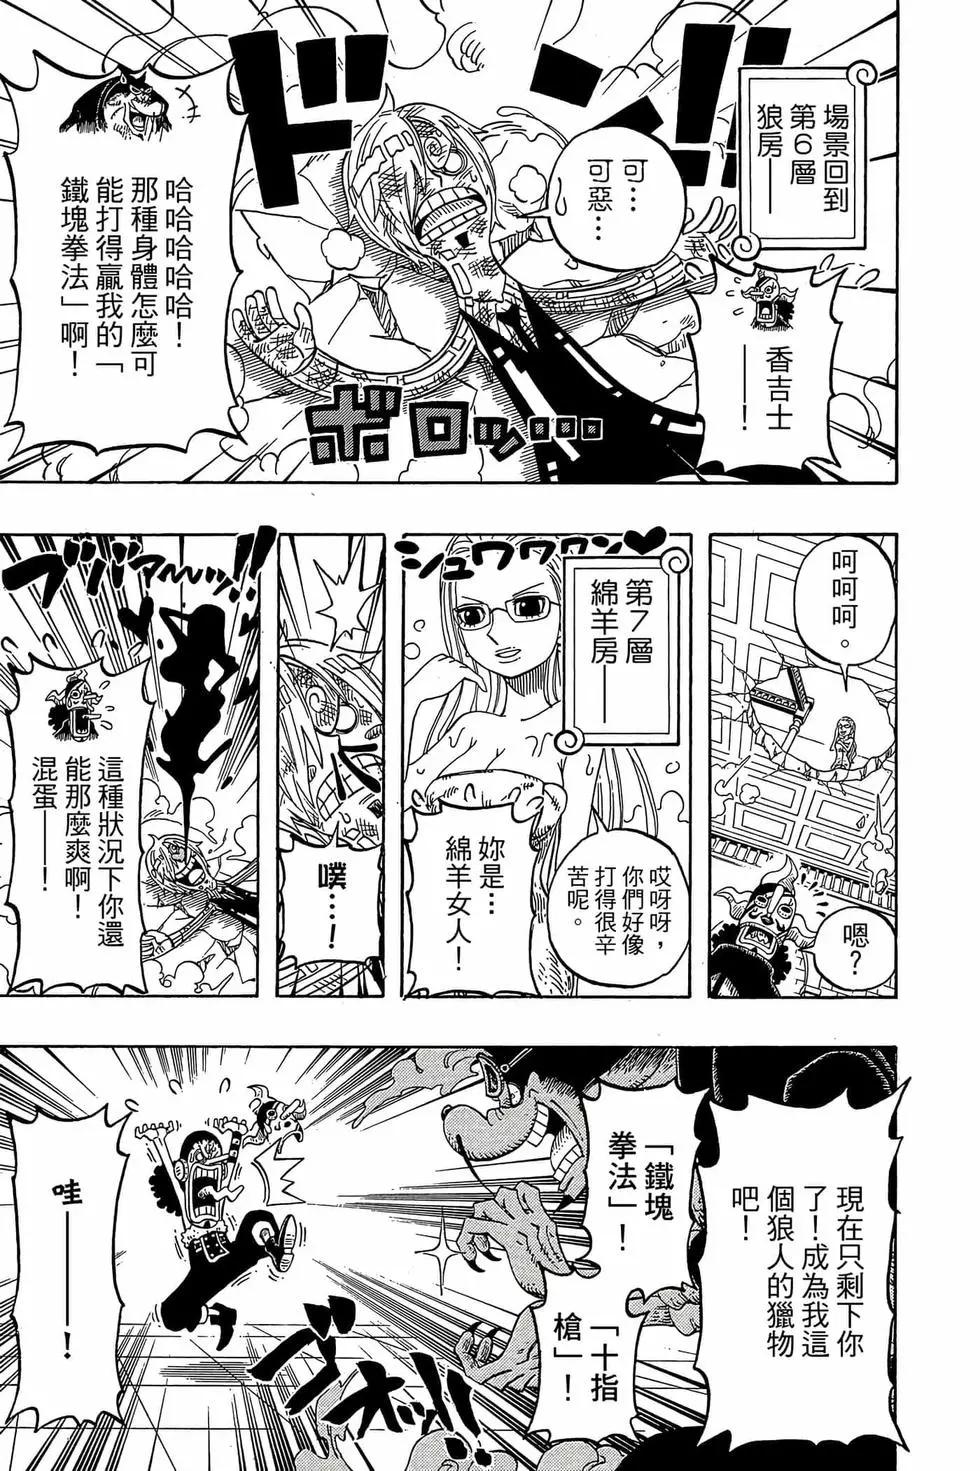 One piece party - 第01卷(2/4) - 2